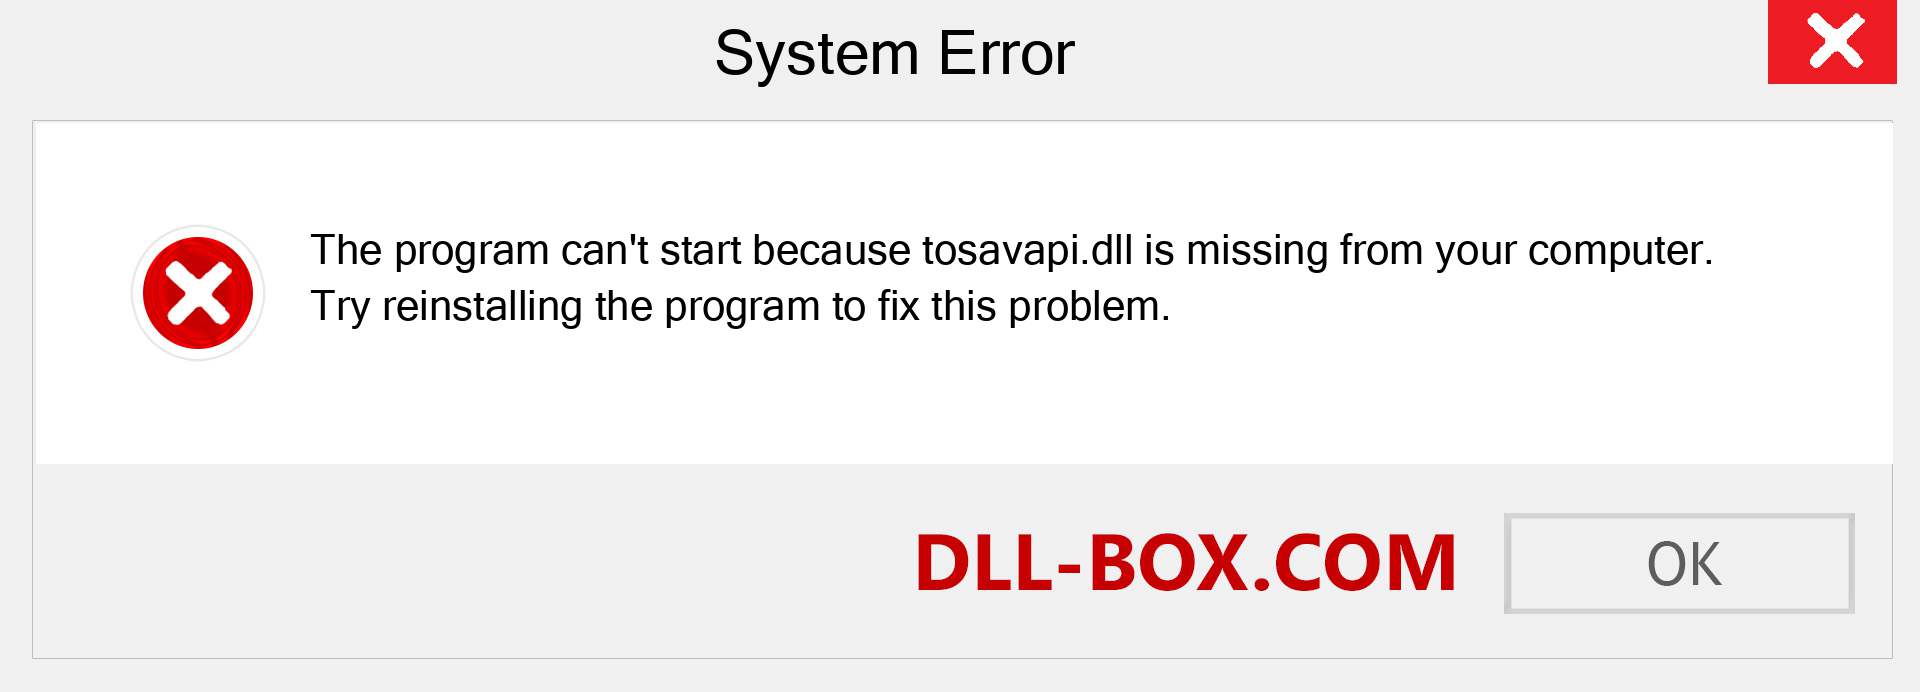  tosavapi.dll file is missing?. Download for Windows 7, 8, 10 - Fix  tosavapi dll Missing Error on Windows, photos, images